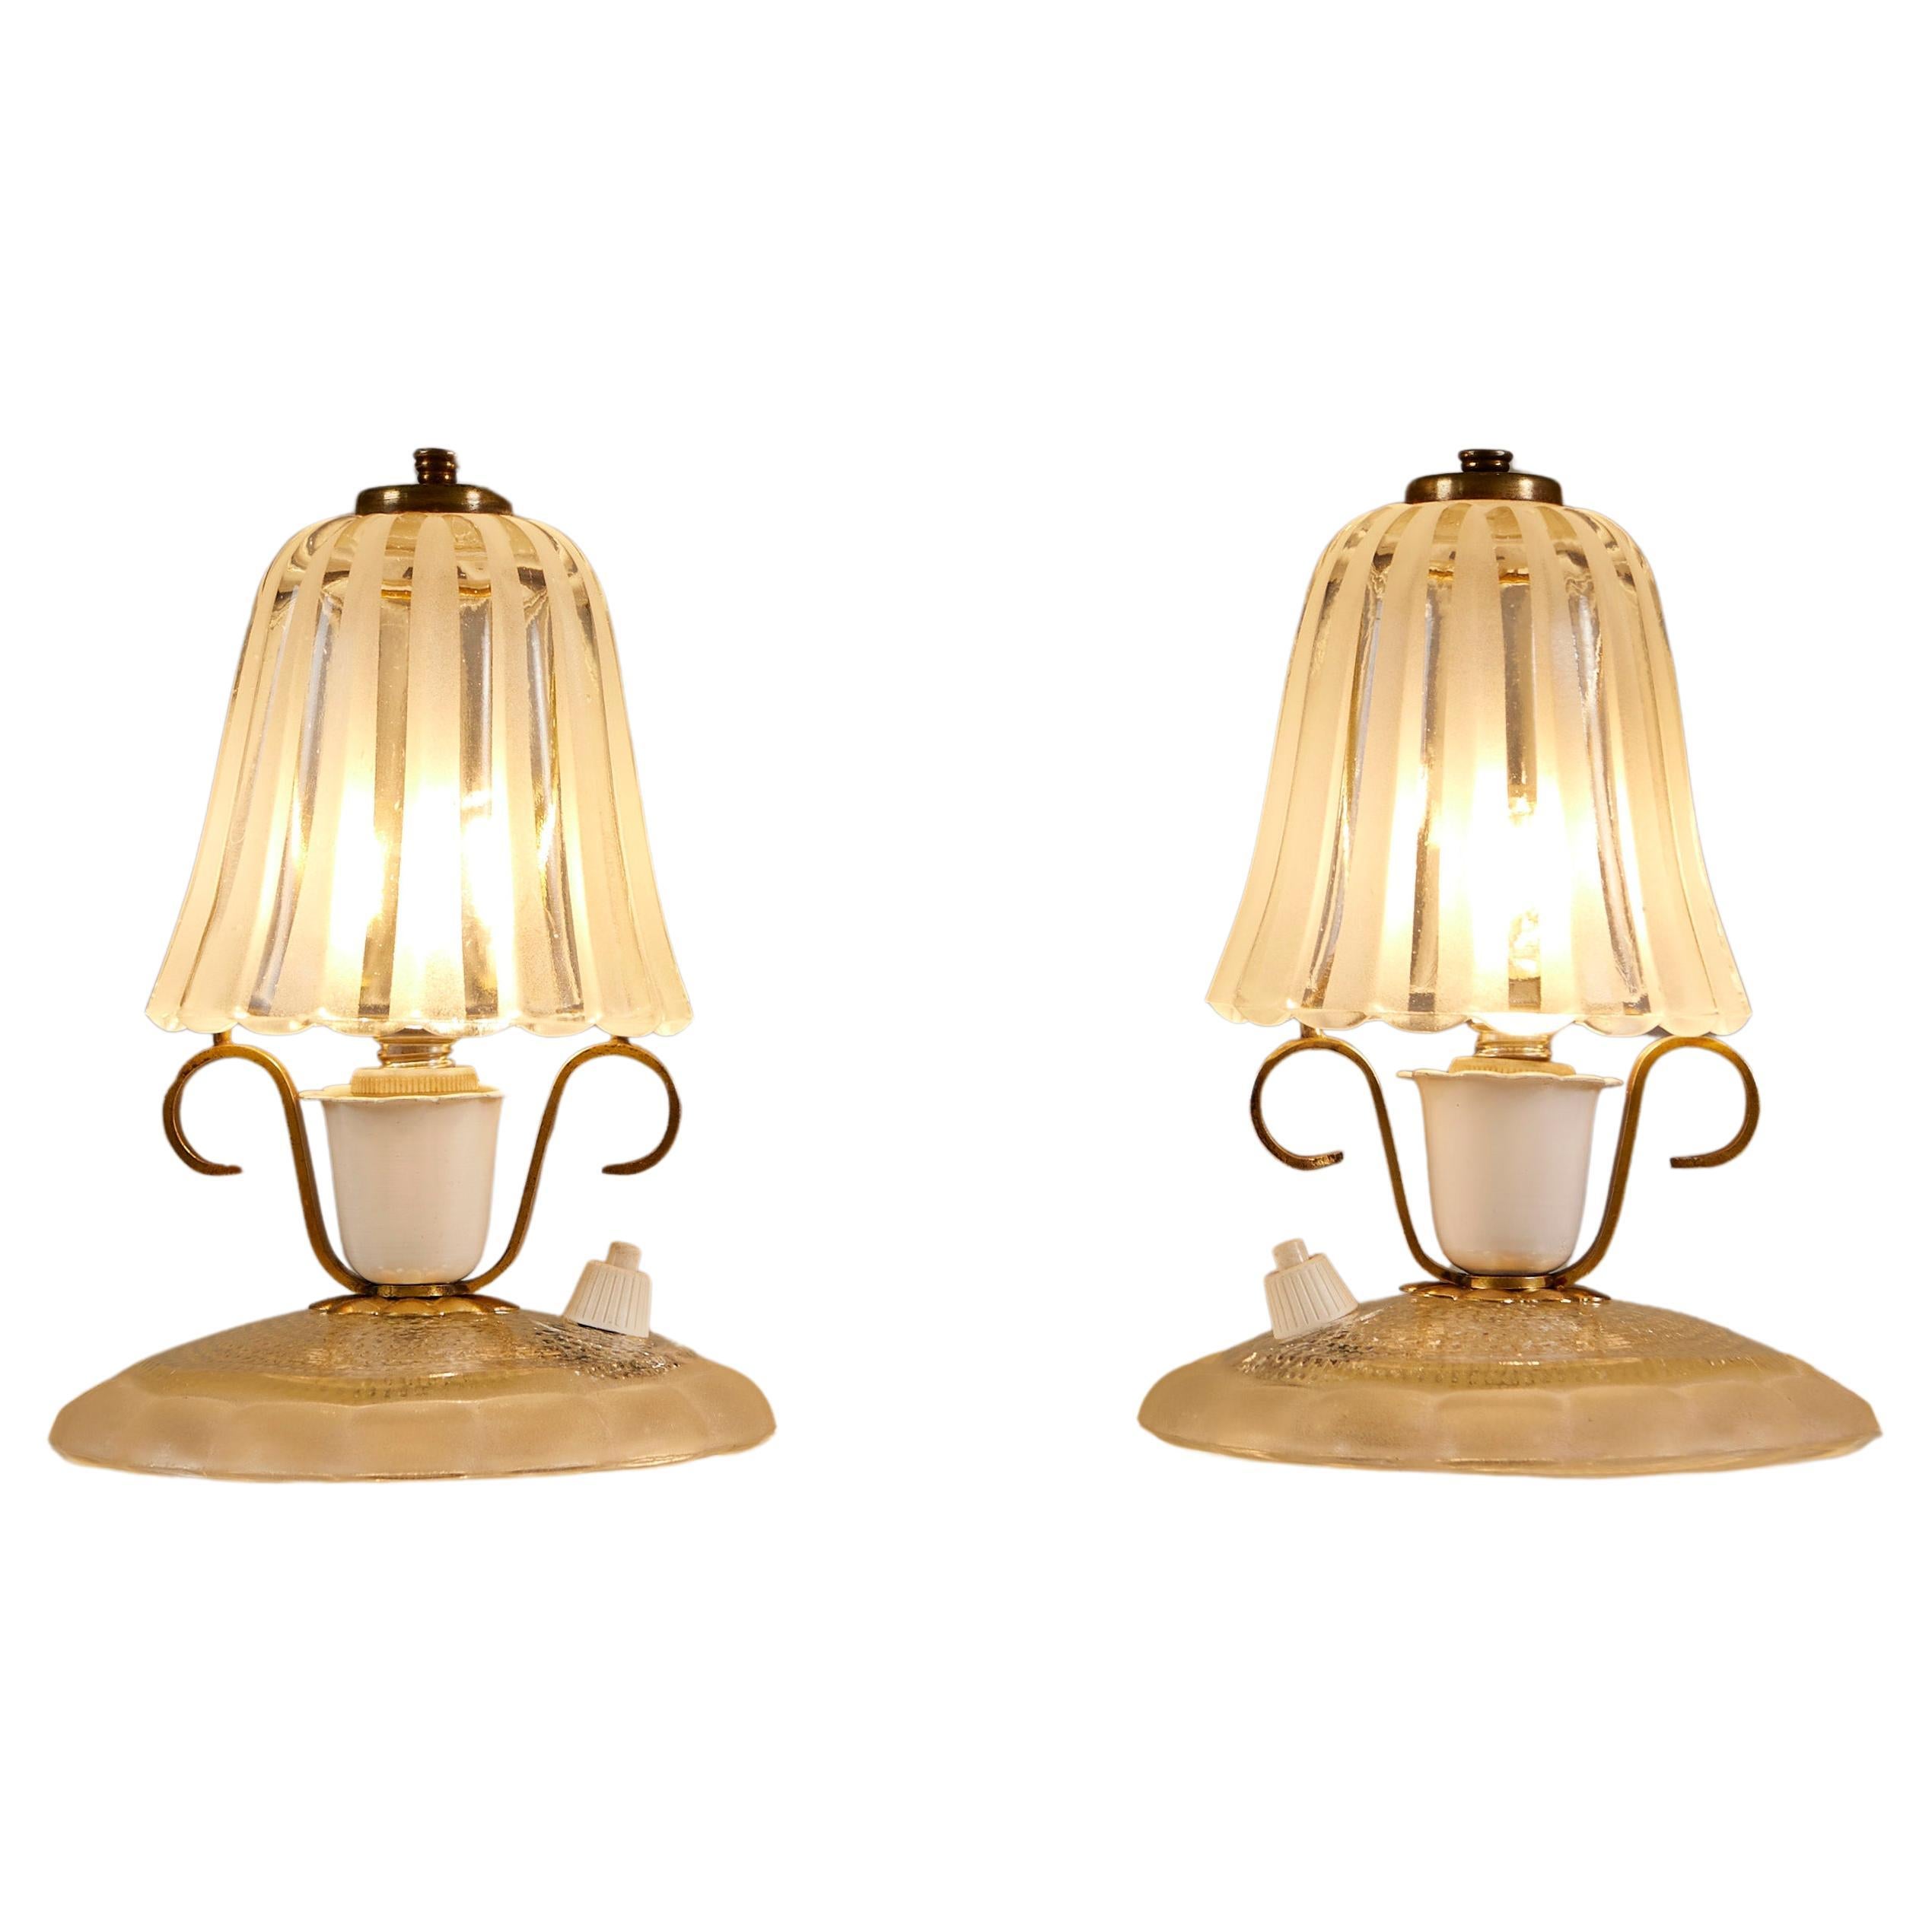 Pair of Italian 1950s glass and brass table lamps